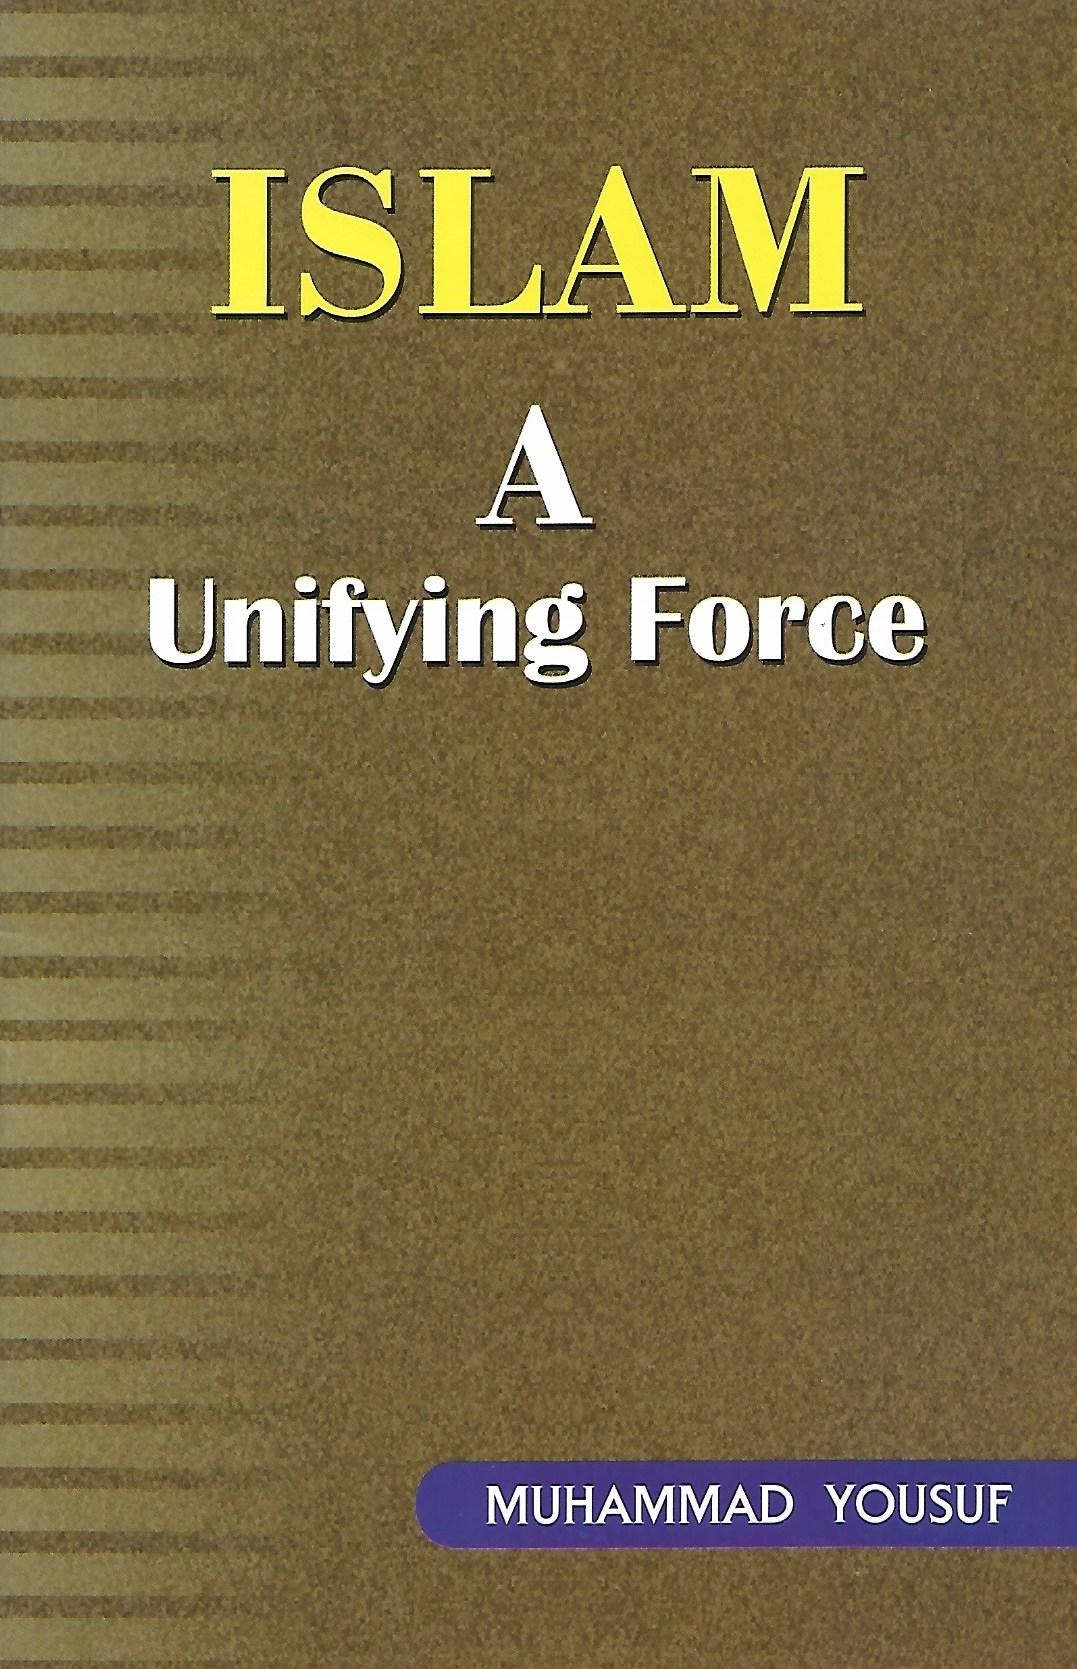 Islam: A Unifying Force